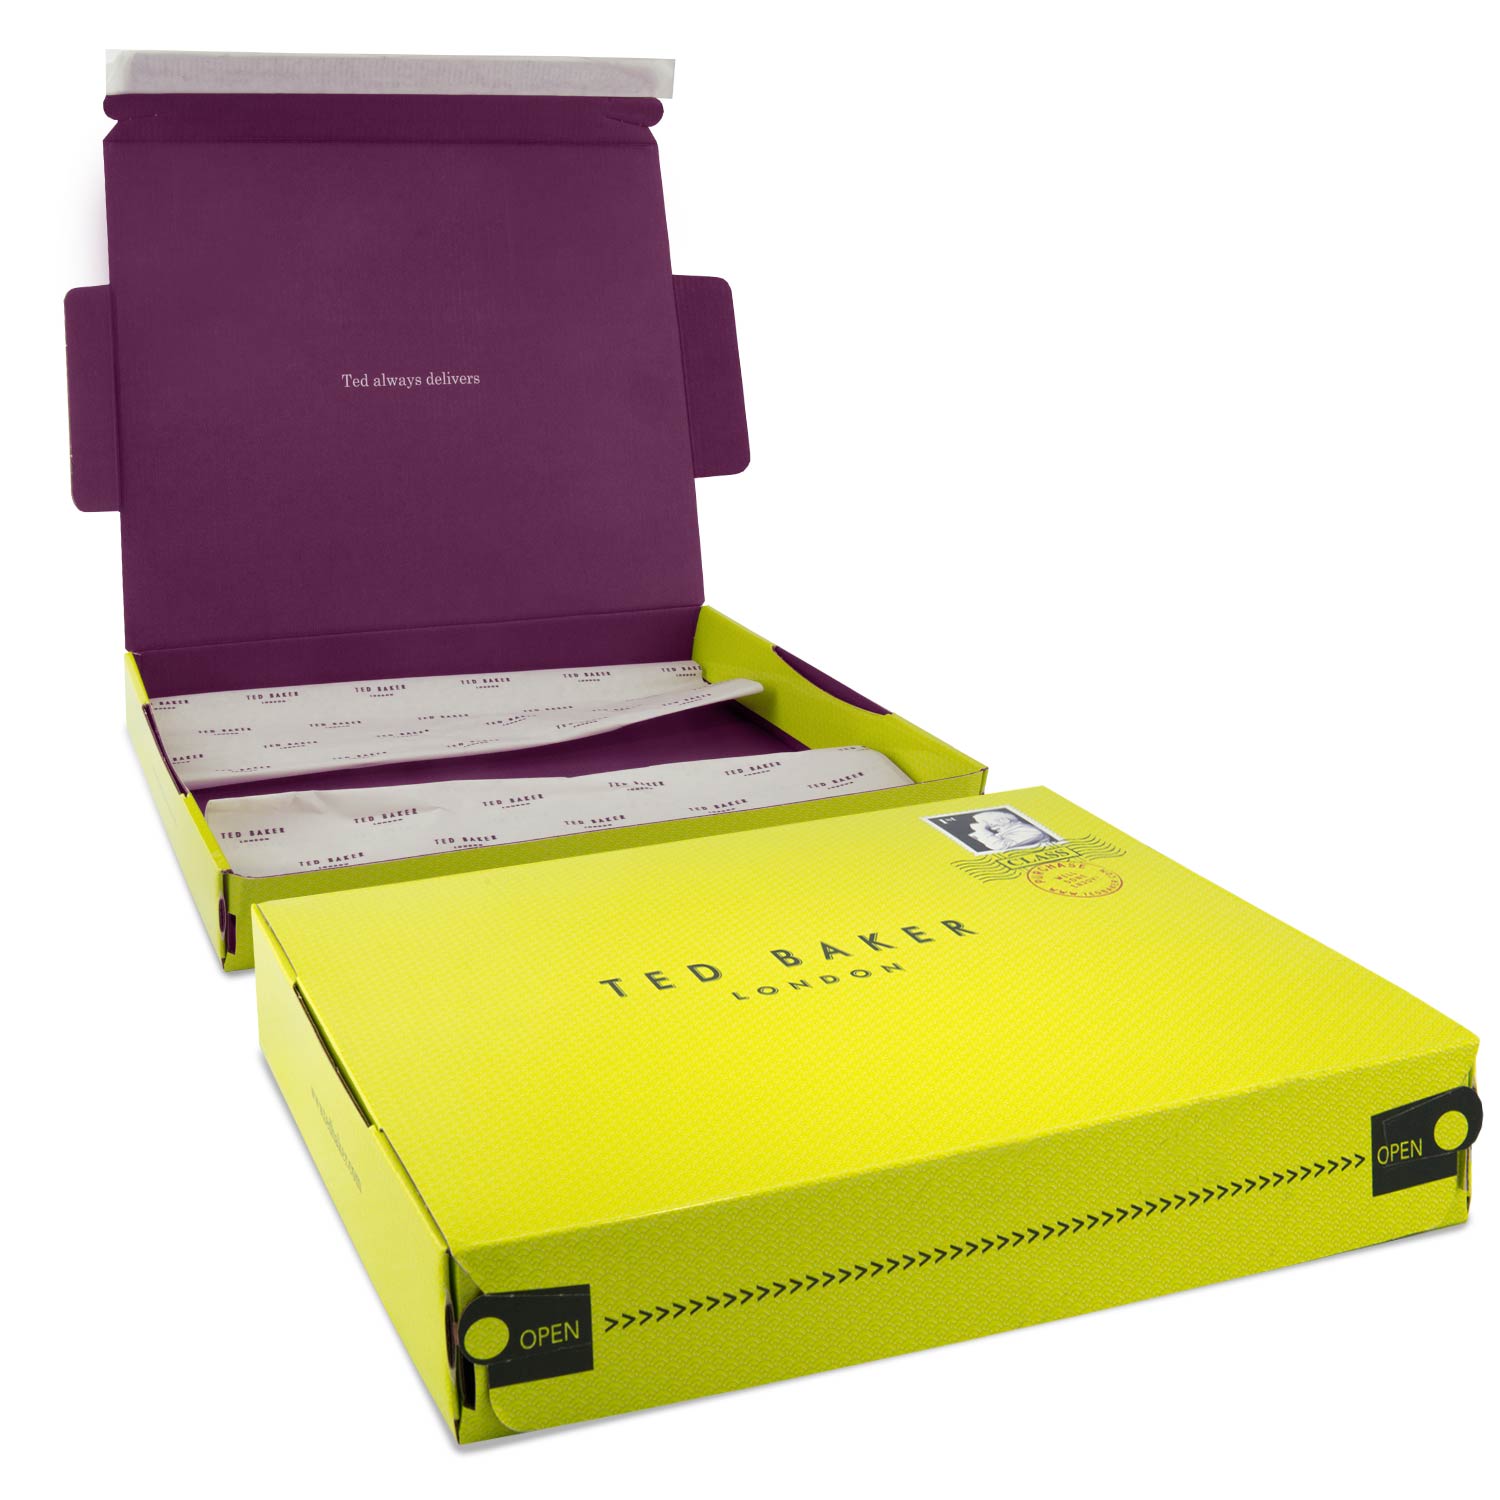 Ted Baker - eCommerce Packaging Case Study – Lil Packaging E-Commerce